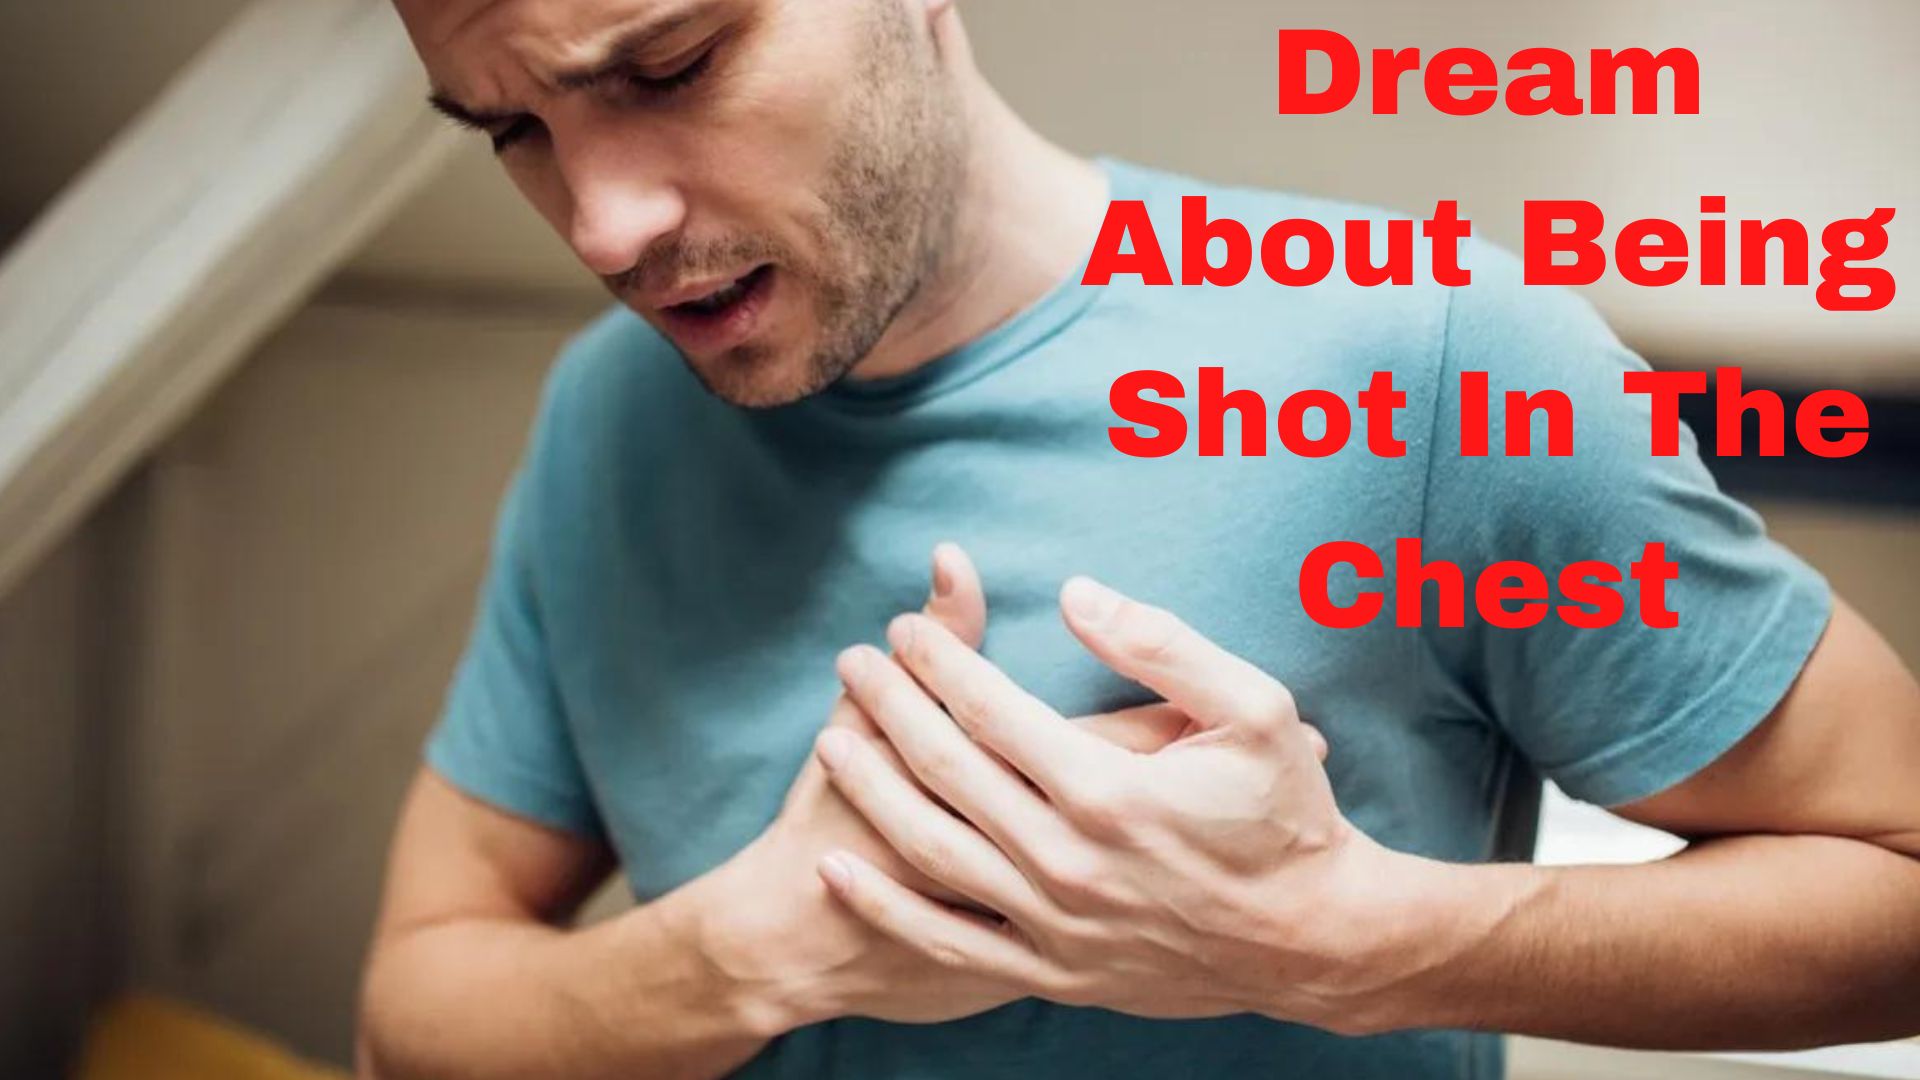 Dream About Being Shot In The Chest - A Sign Of Internal Concerns